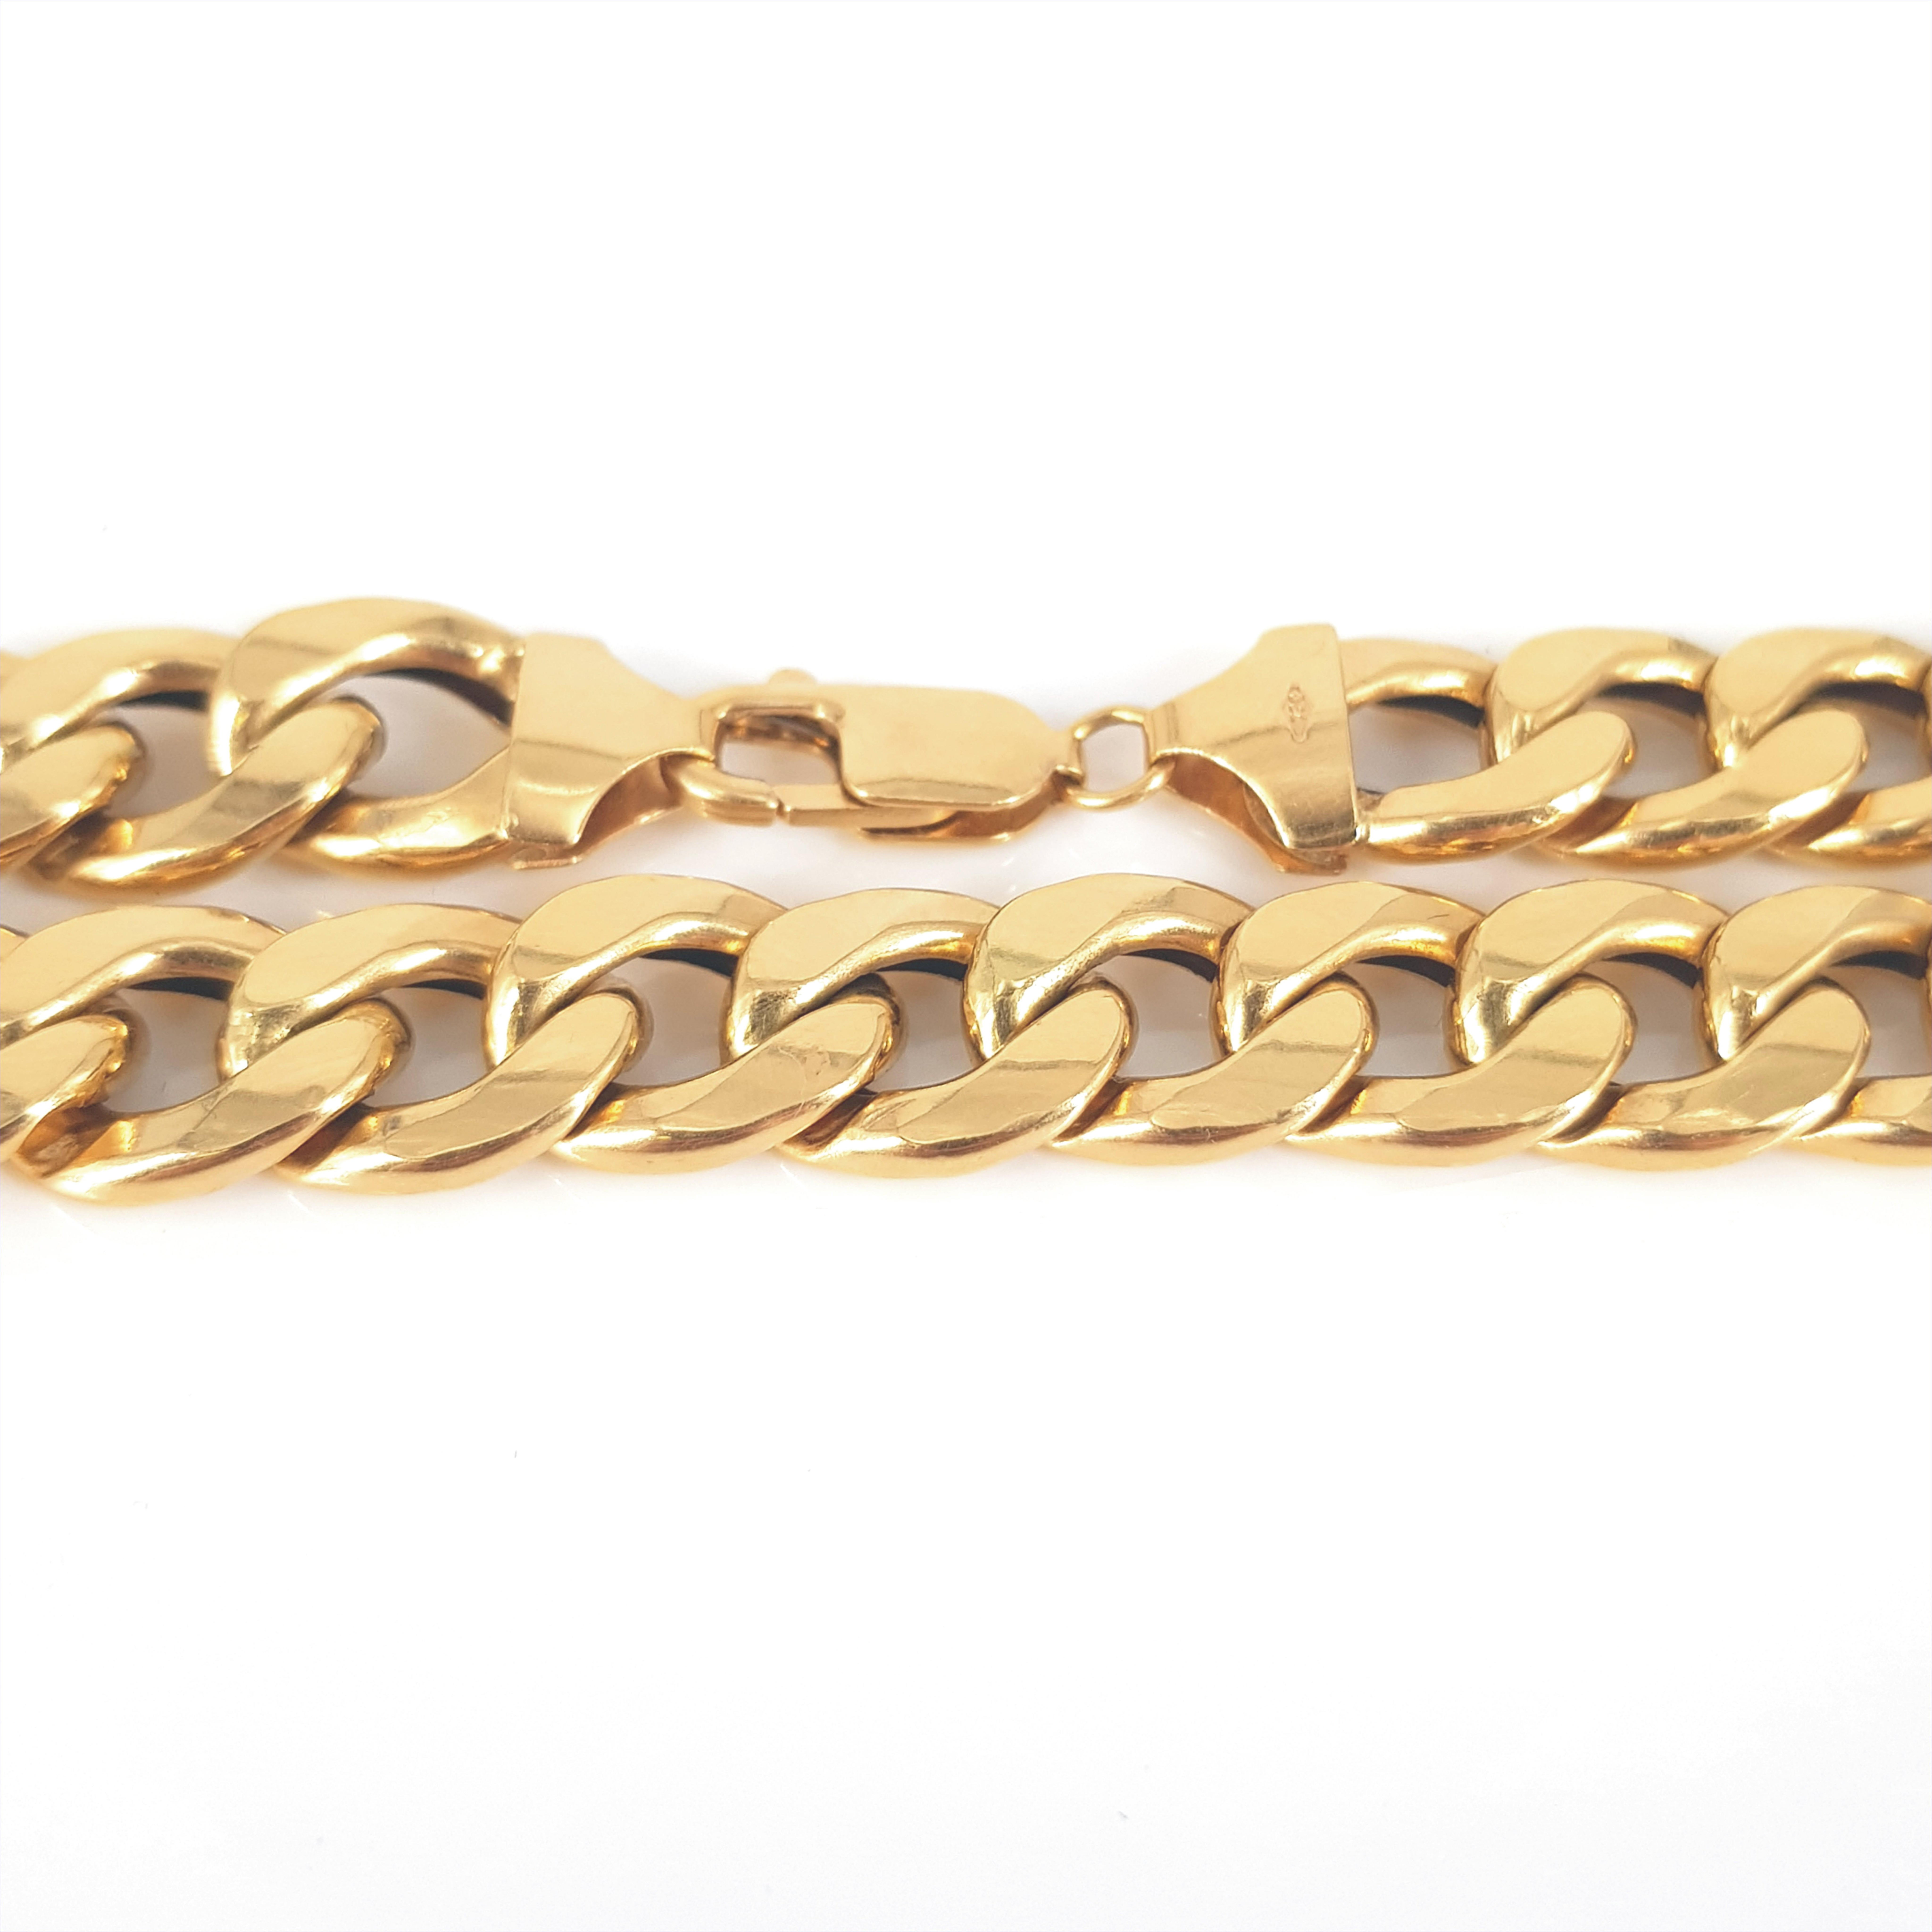 18ct gold chain price in south africa